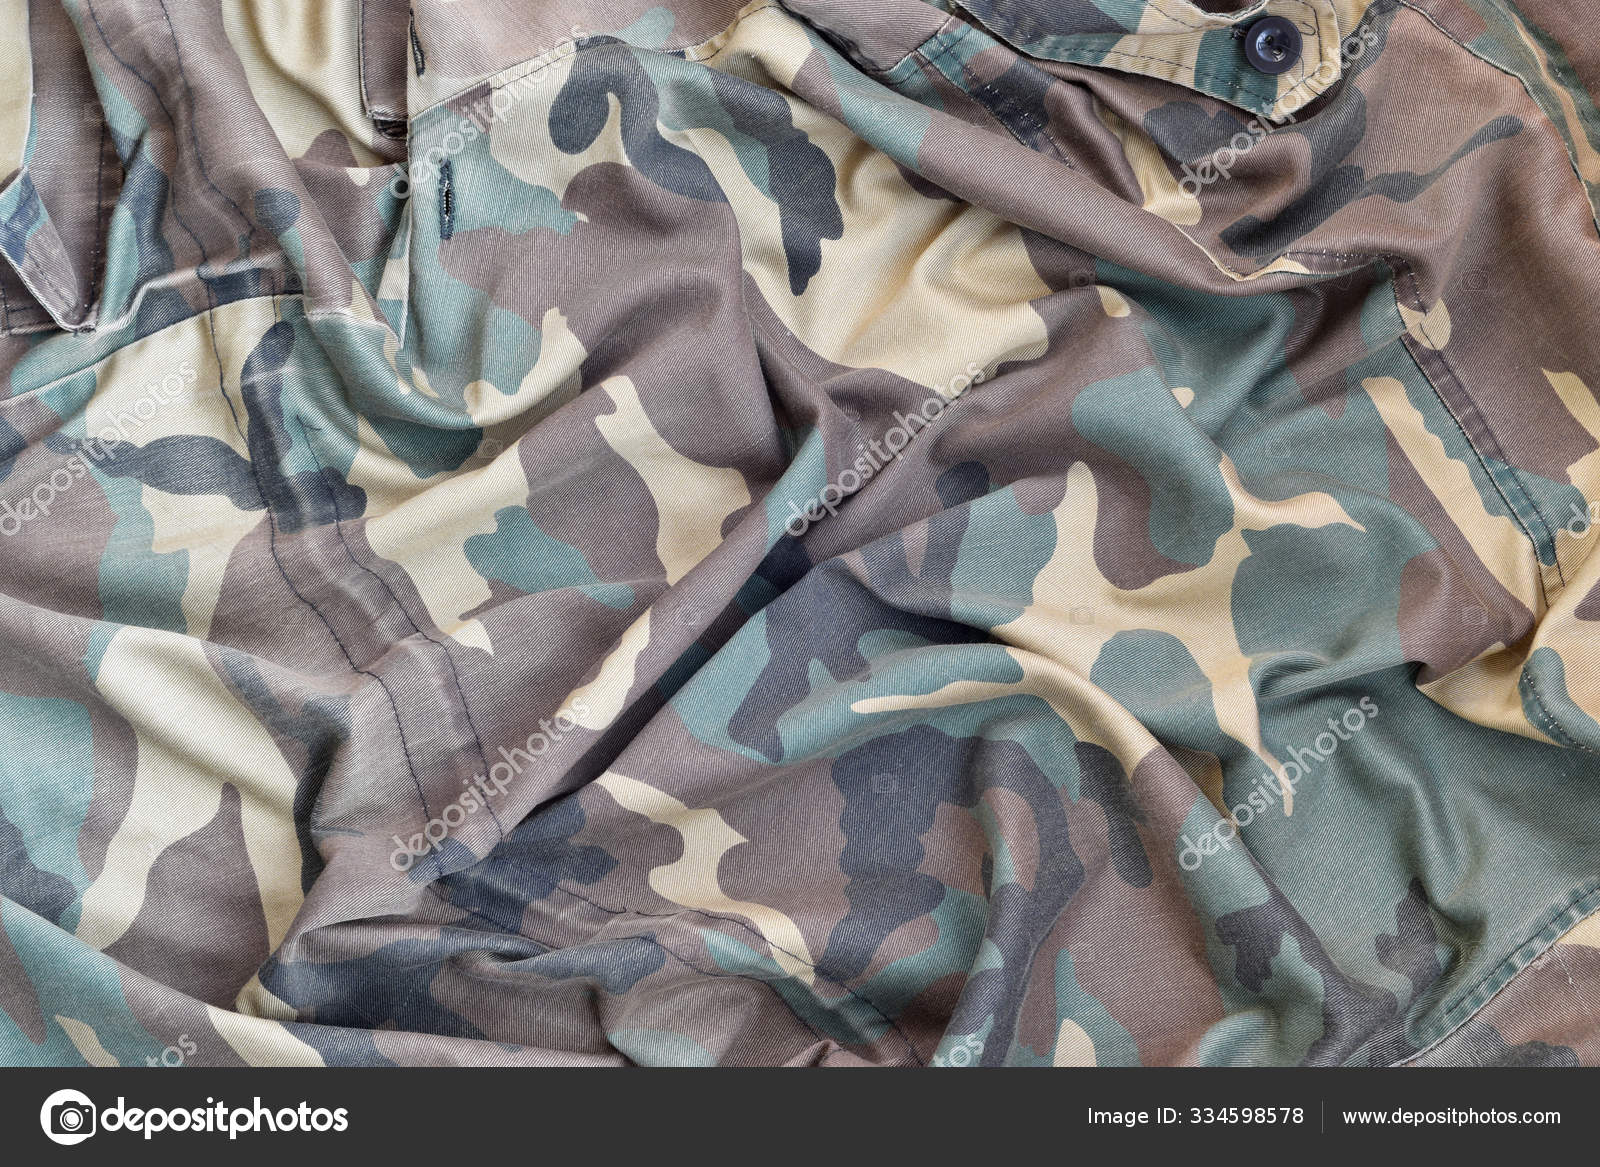 Camouflage Background Texture As Backdrop For Military Video Games And Design Projects Stock Photo C Mehaniq 334598578 - 13546100 night camouflage texture army background roblox